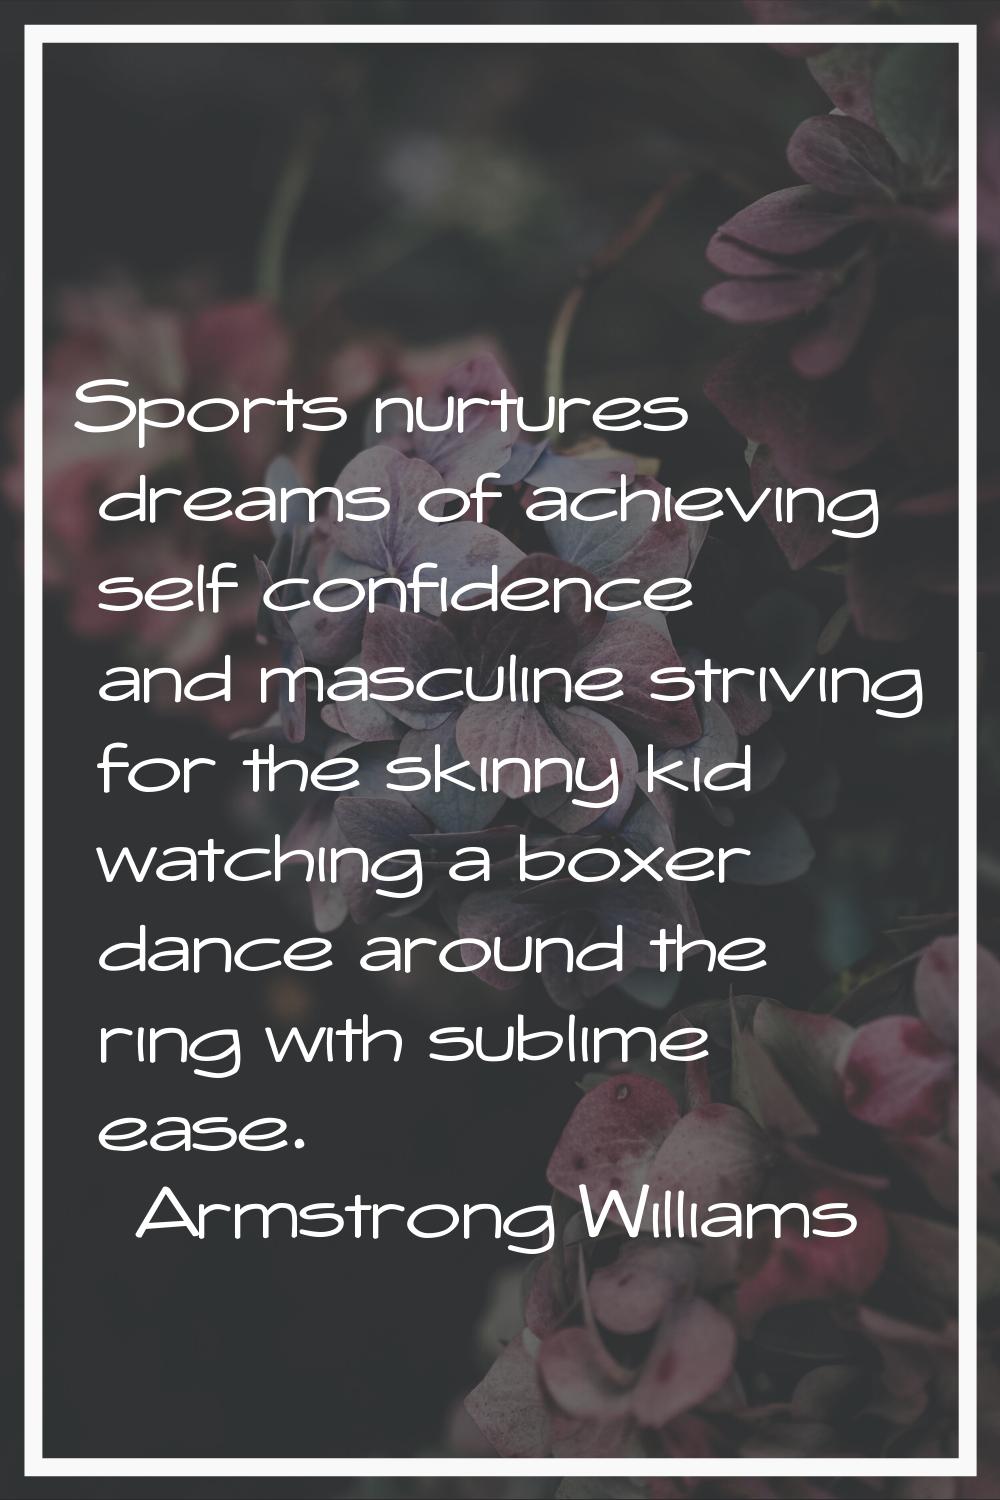 Sports nurtures dreams of achieving self confidence and masculine striving for the skinny kid watch